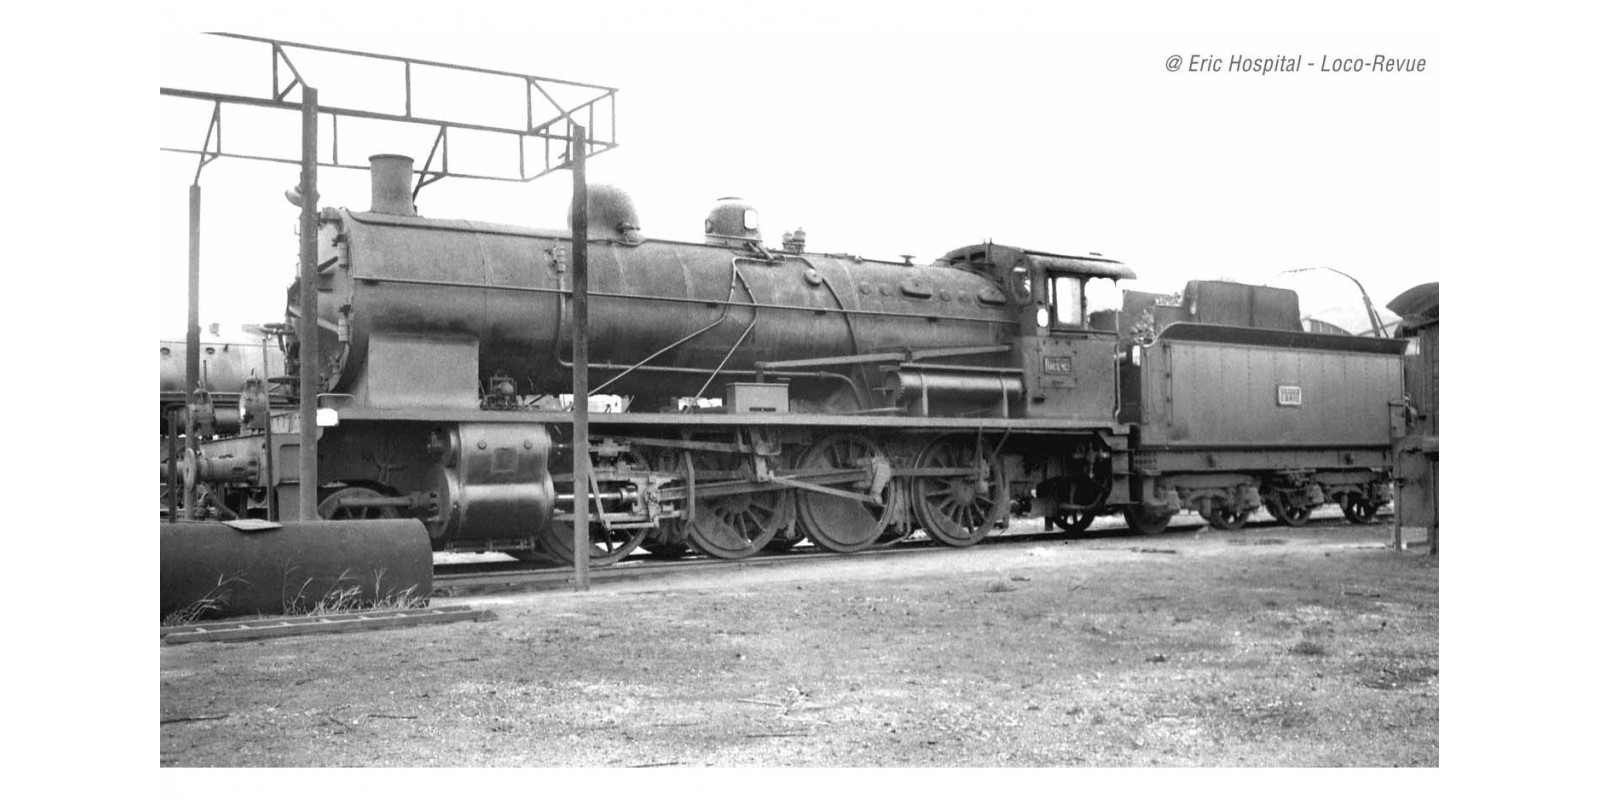 JO2407 SNCF, 140 C 362 + tender 18 C 550, black, green with yellow lines and golden boiler rings